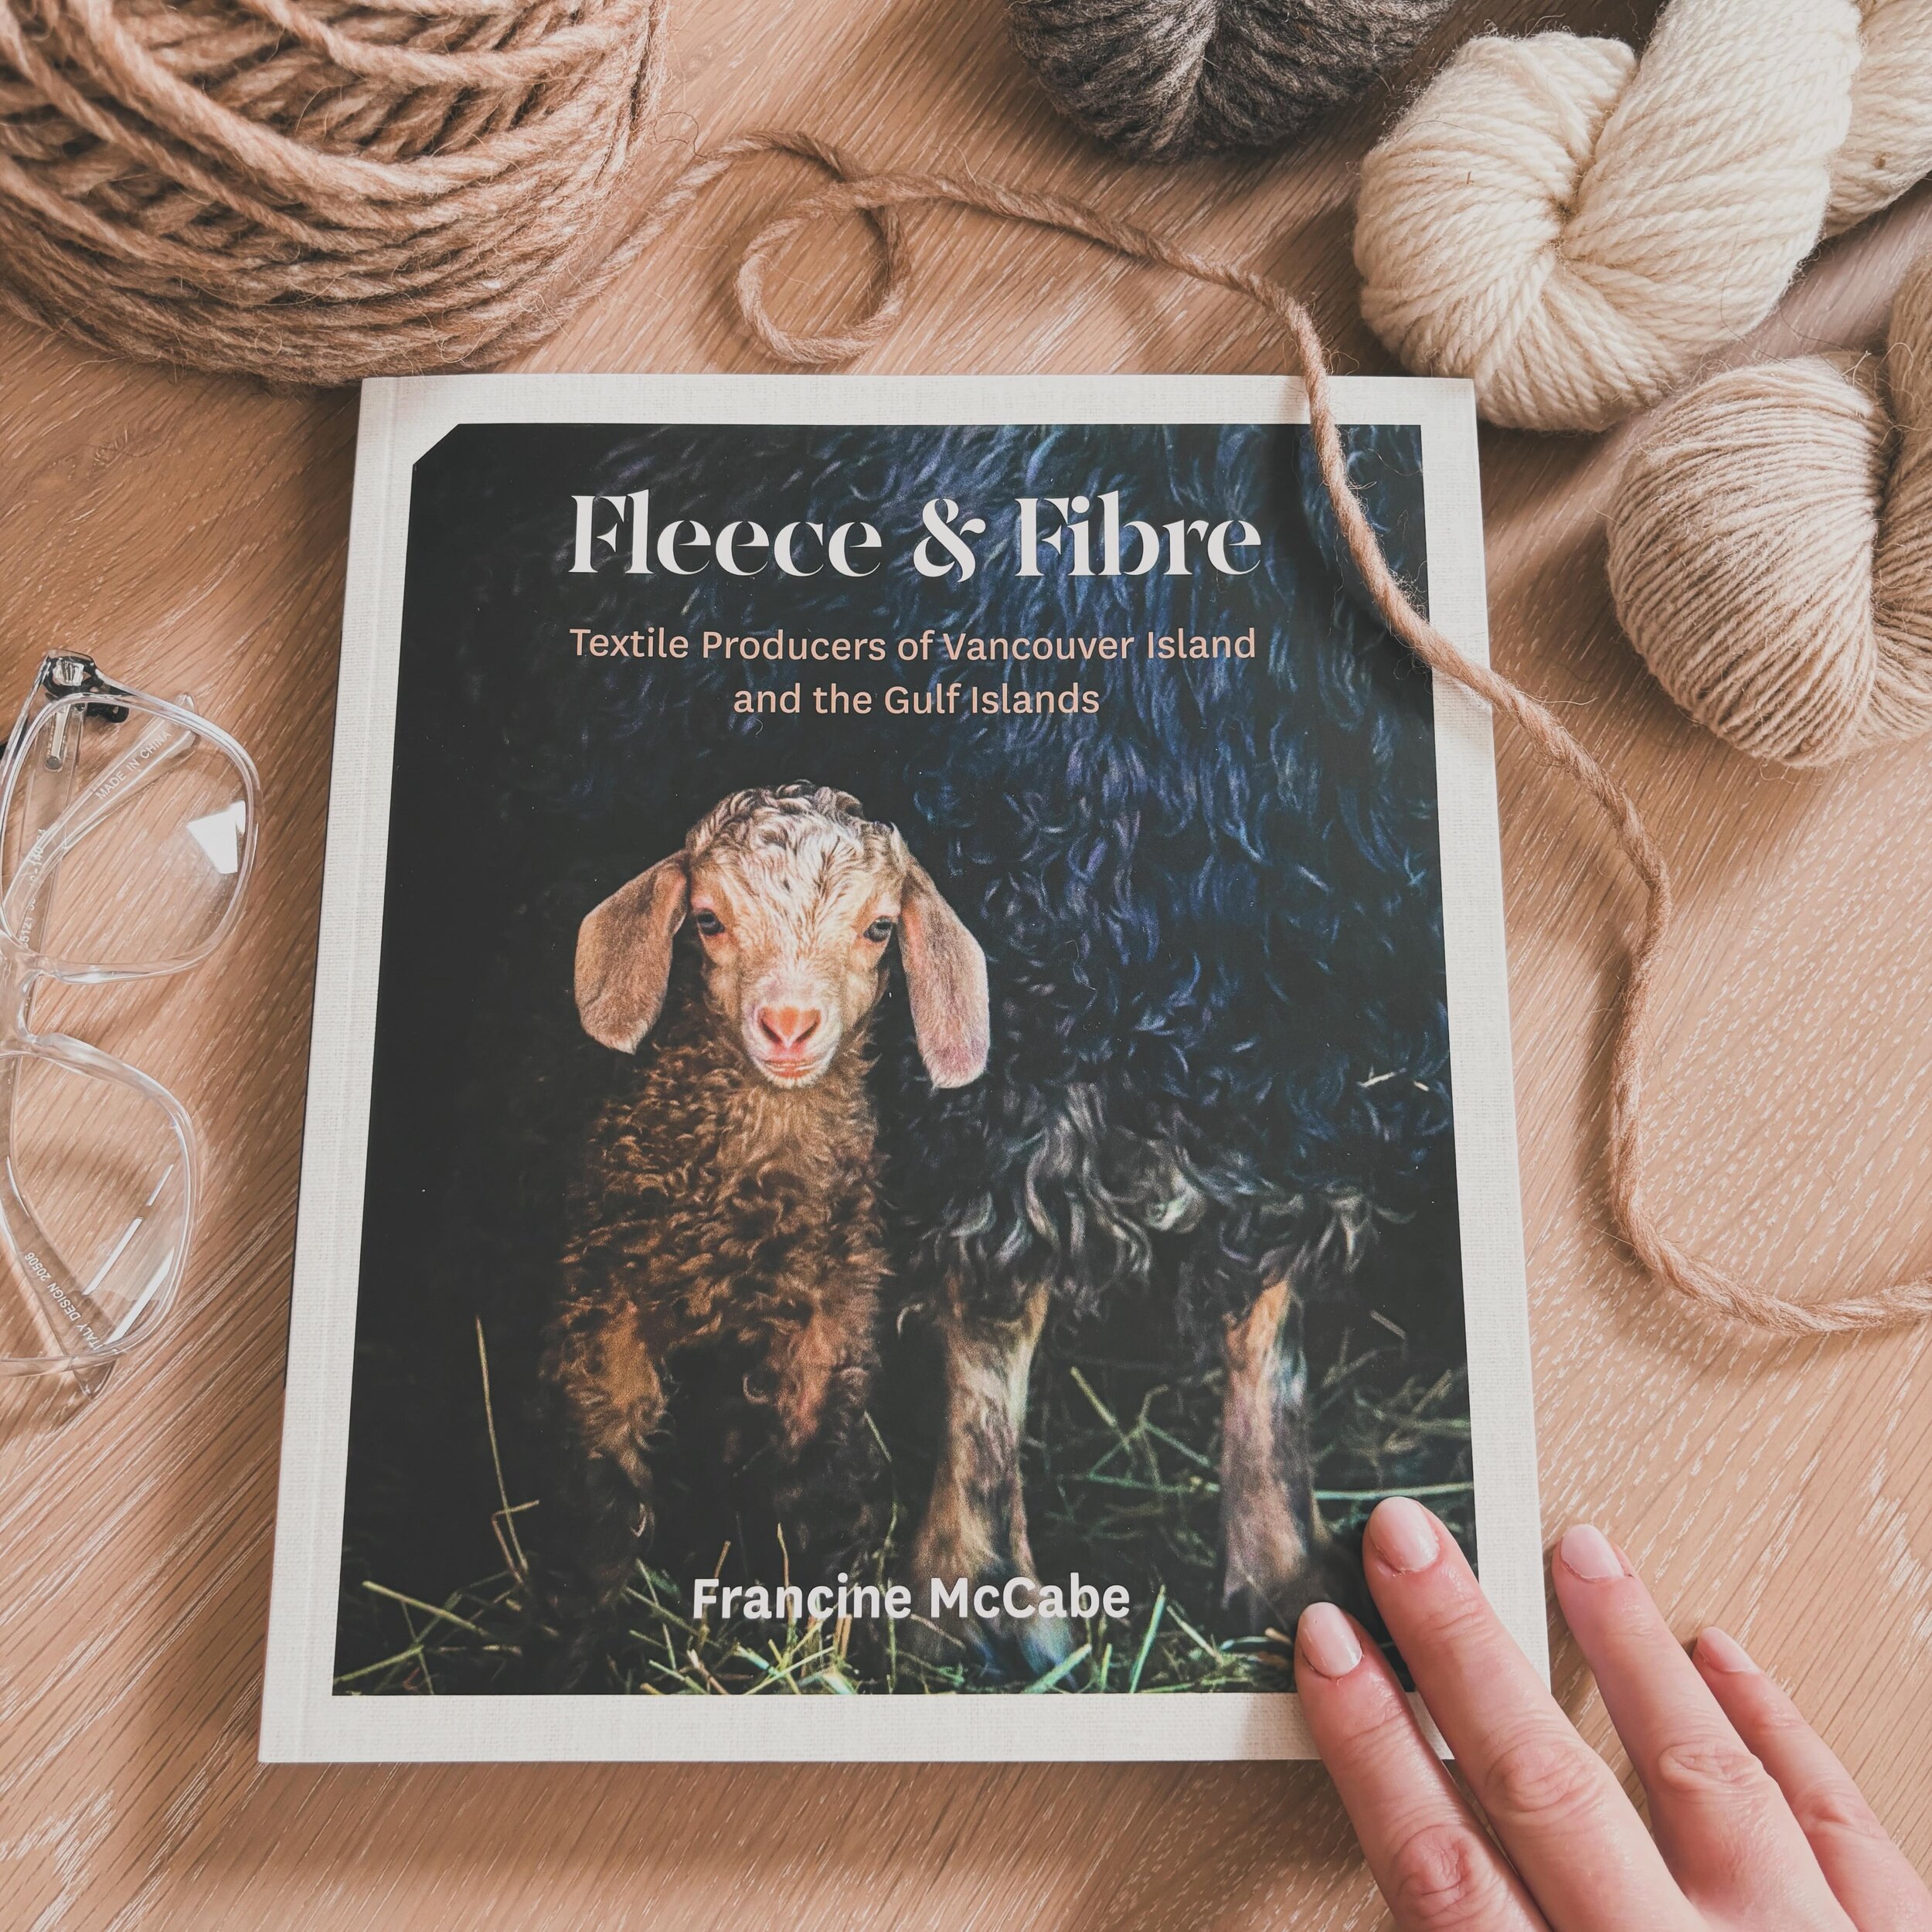 Reading and re-reading this fabulous new book - Fleece &amp; Fibre: Textile Producers of Vancouver Island and the Gulf Islands by Francine McCabe (@f.renee_fibreart). It&rsquo;s a fascinating and gorgeously photographed book that showcases this beaut